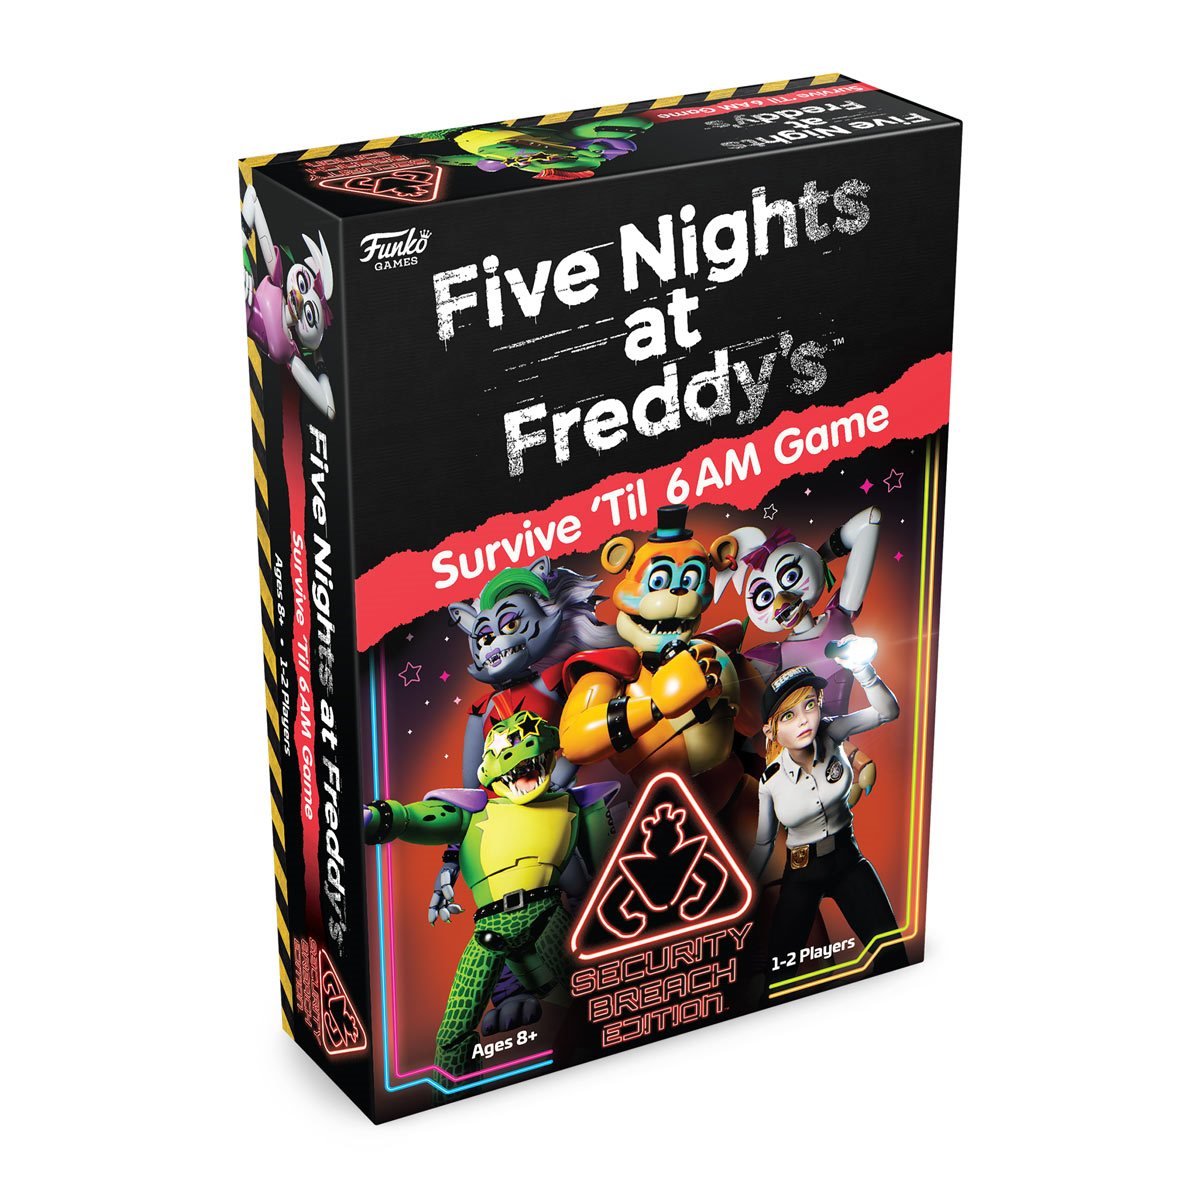 Buy Five Nights at Freddy's Survive 'Til 6AM Game - Security Breach Edition  at Funko.